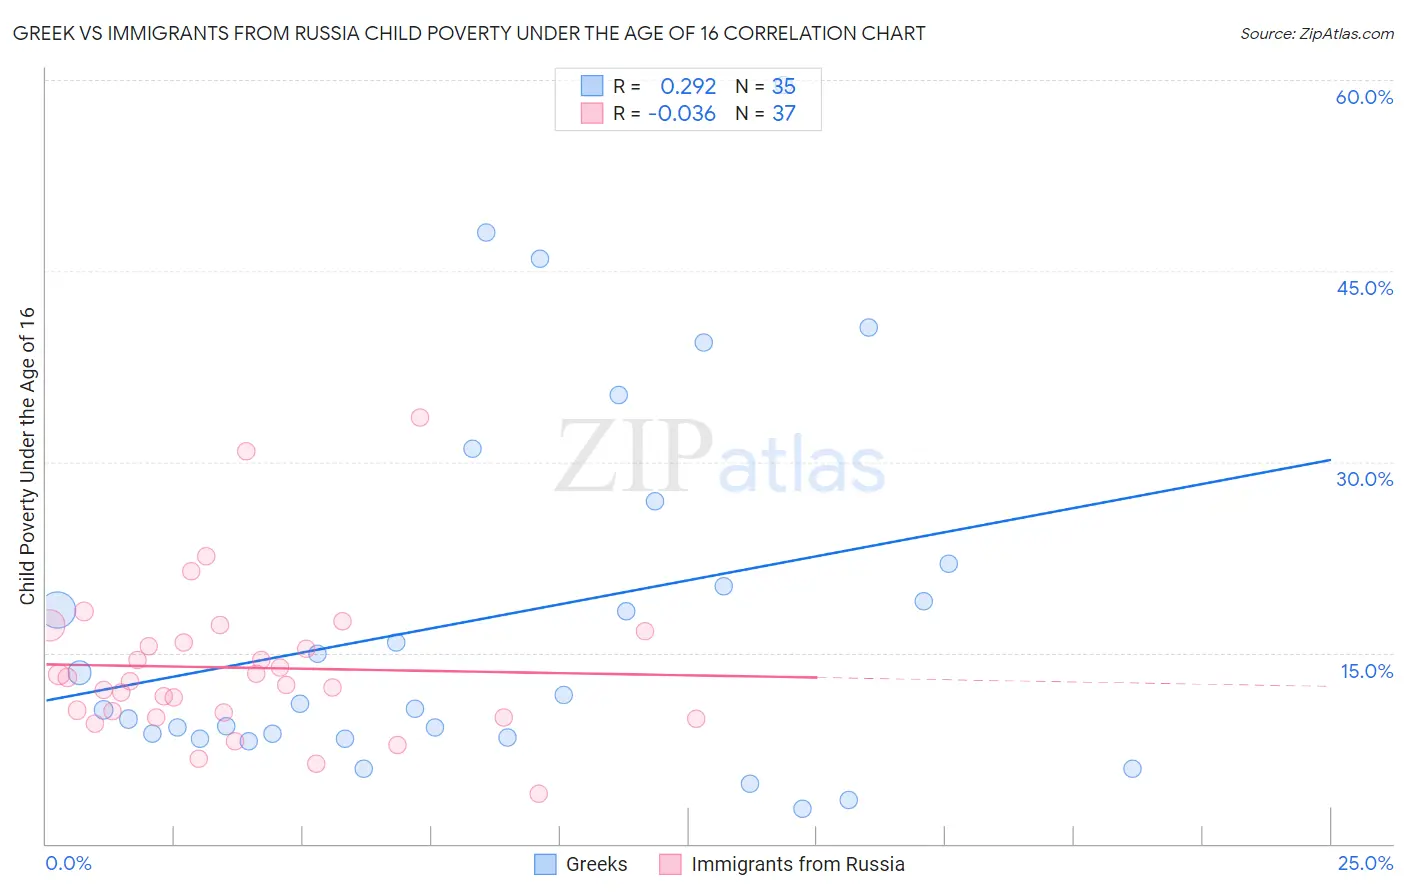 Greek vs Immigrants from Russia Child Poverty Under the Age of 16